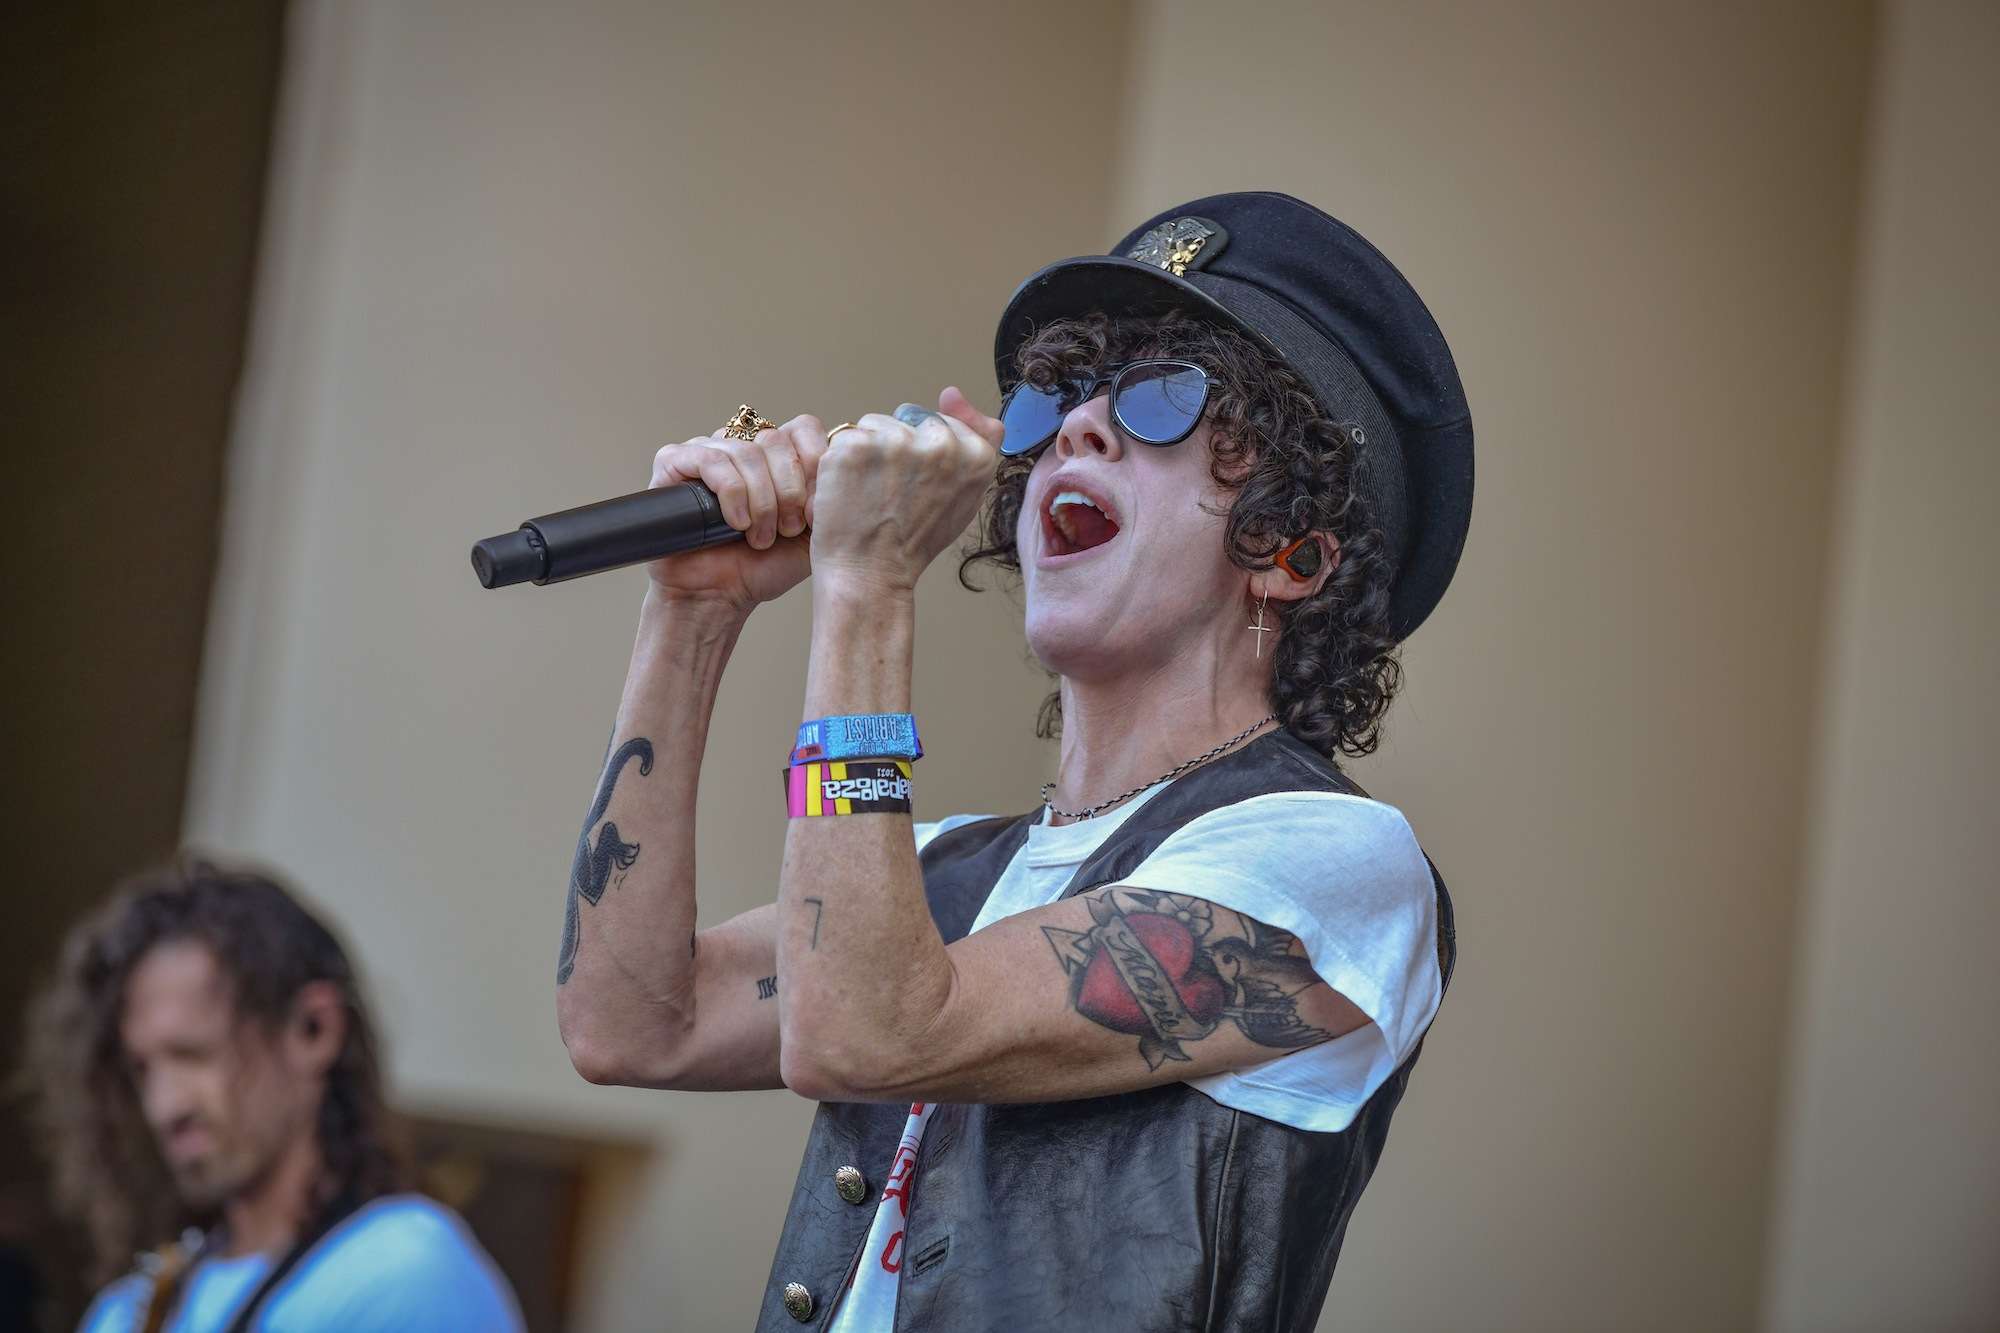 LP Live at Lollapalooza [GALLERY] 4